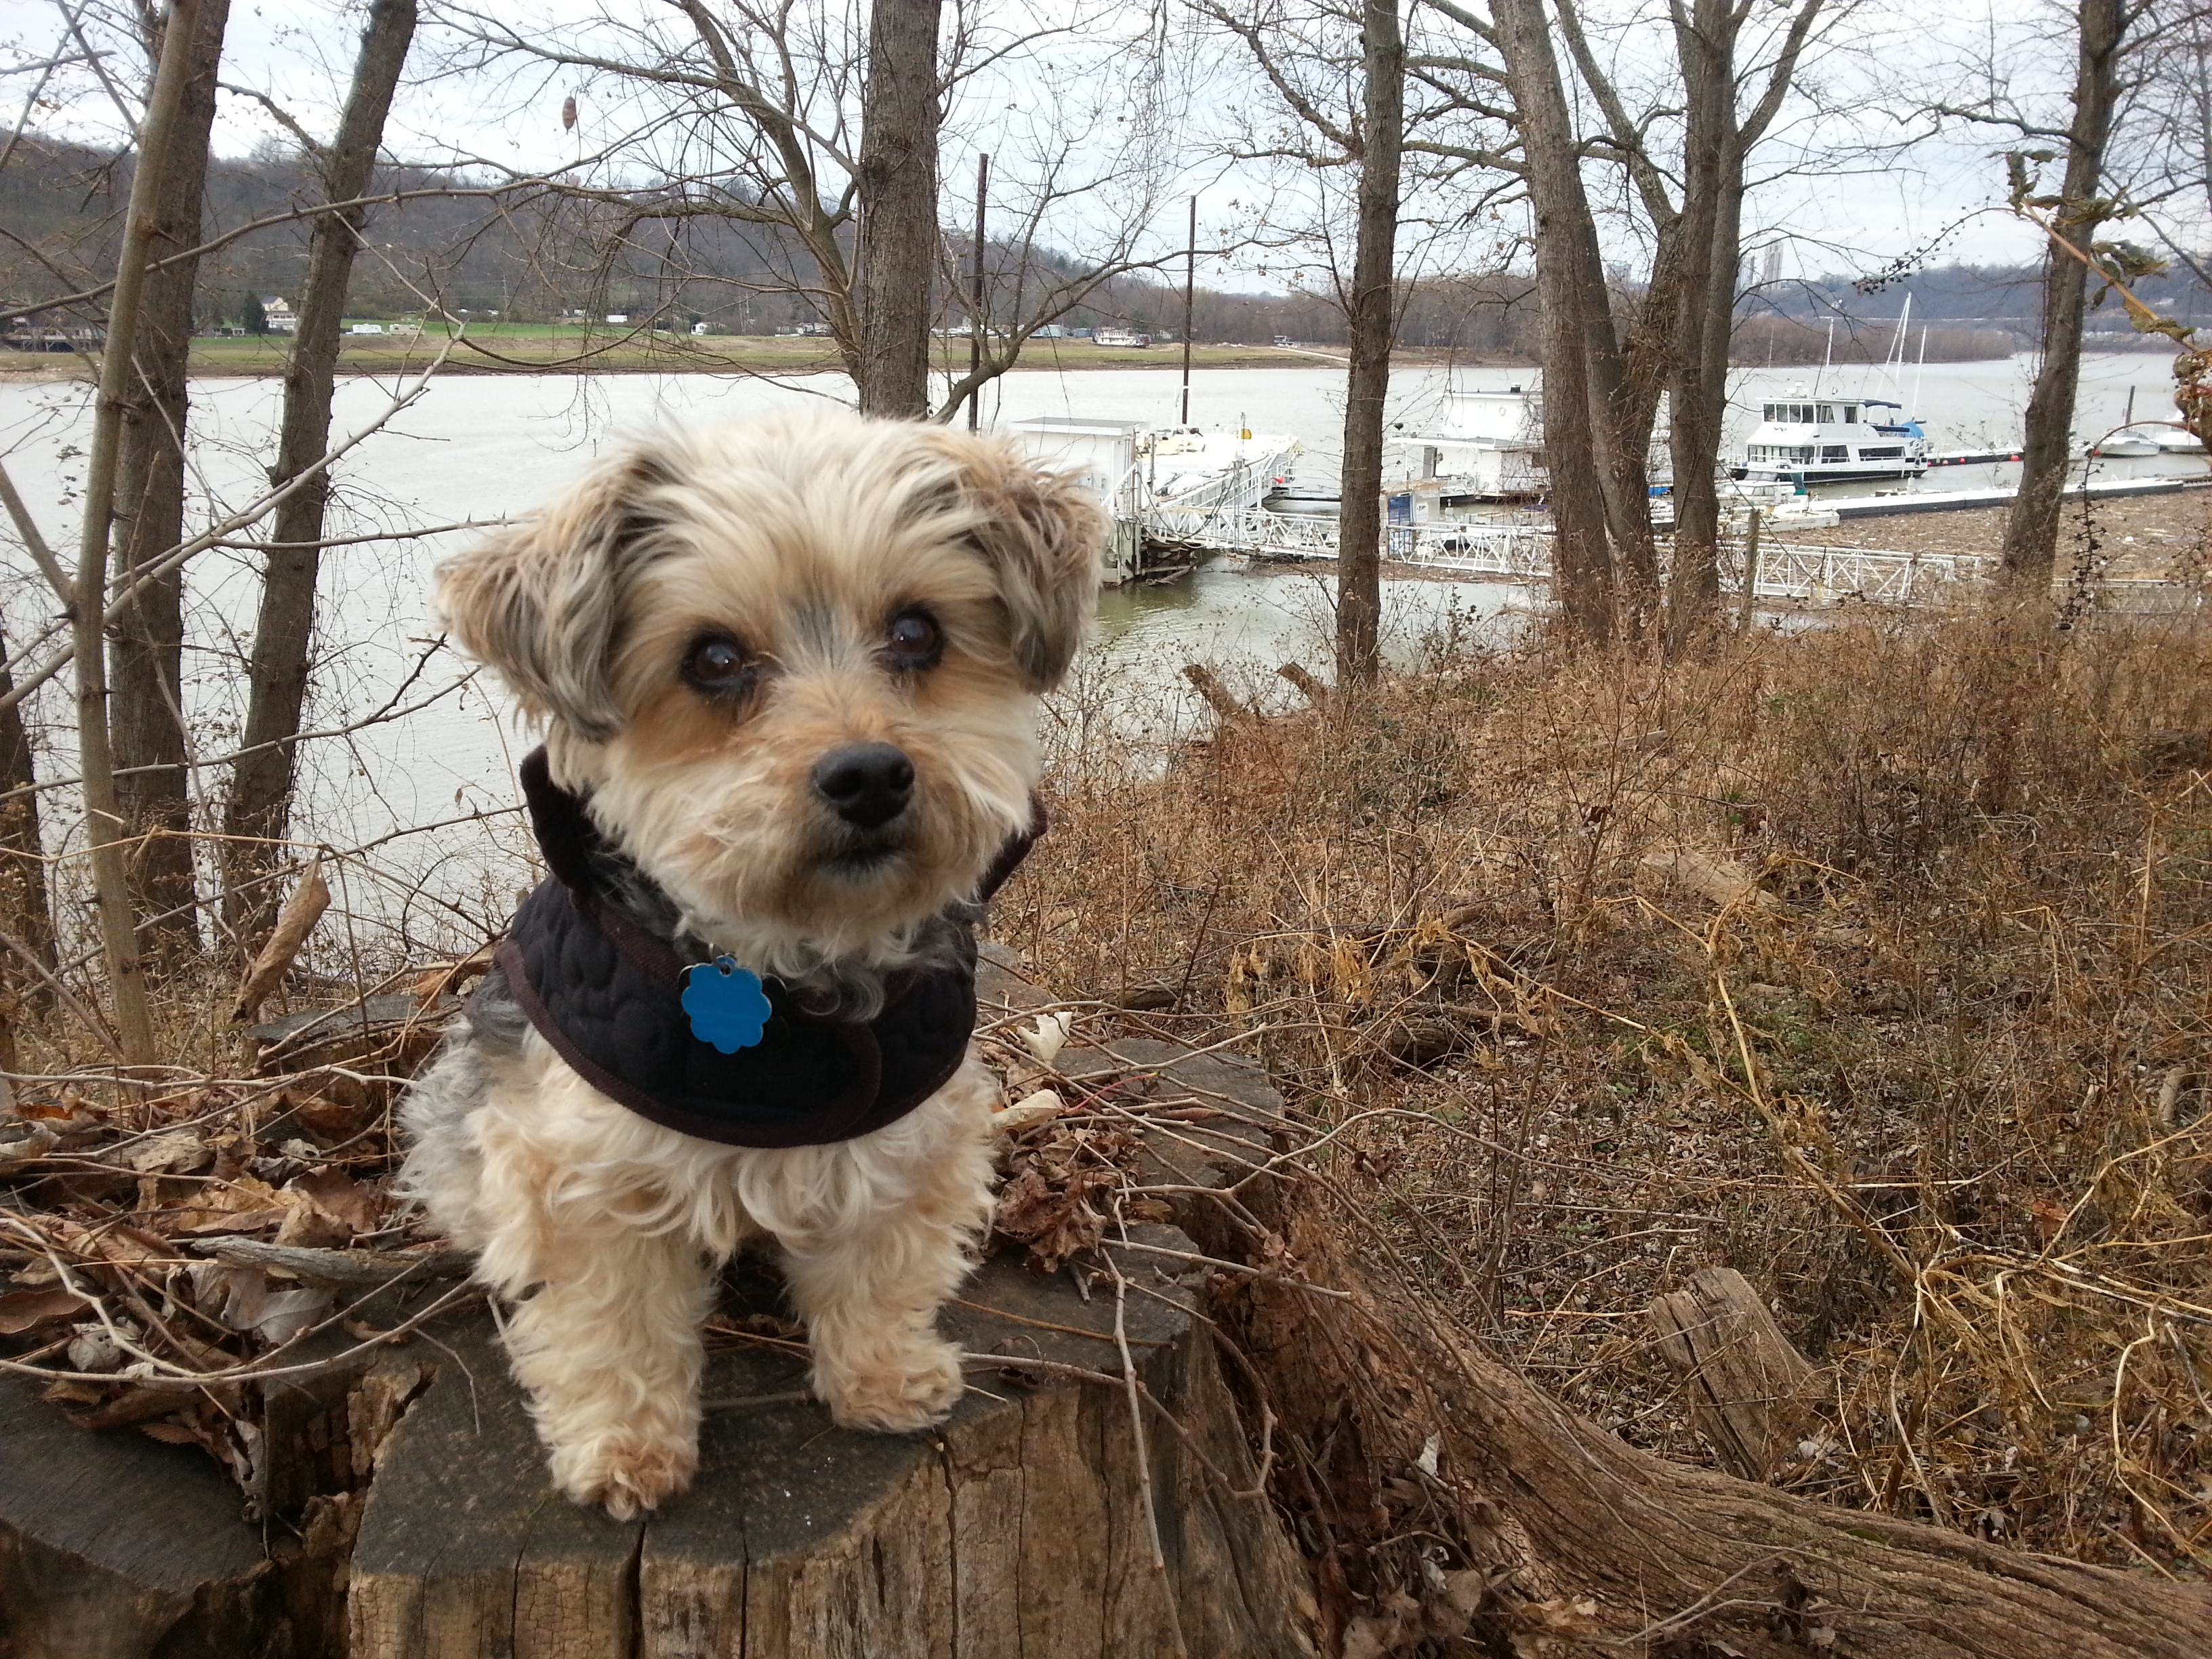 A picture of Cricket the dog, a Yorkie-Poo mix